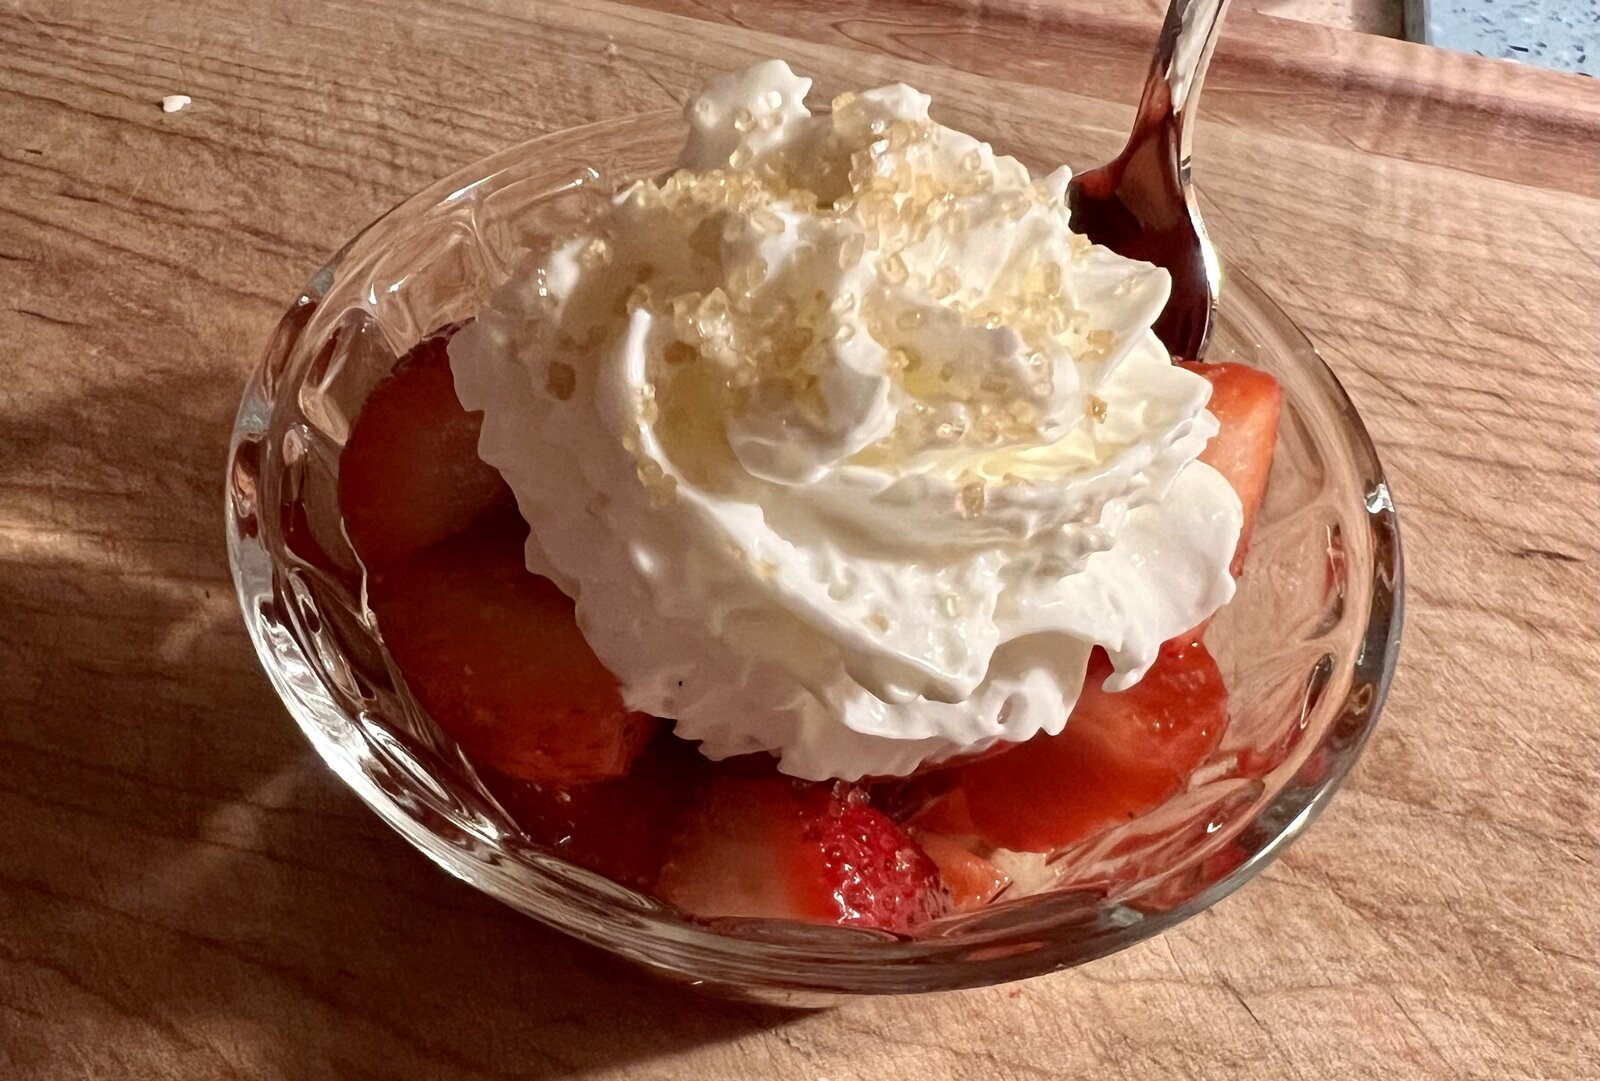 Strawberries in Madeira and Cream